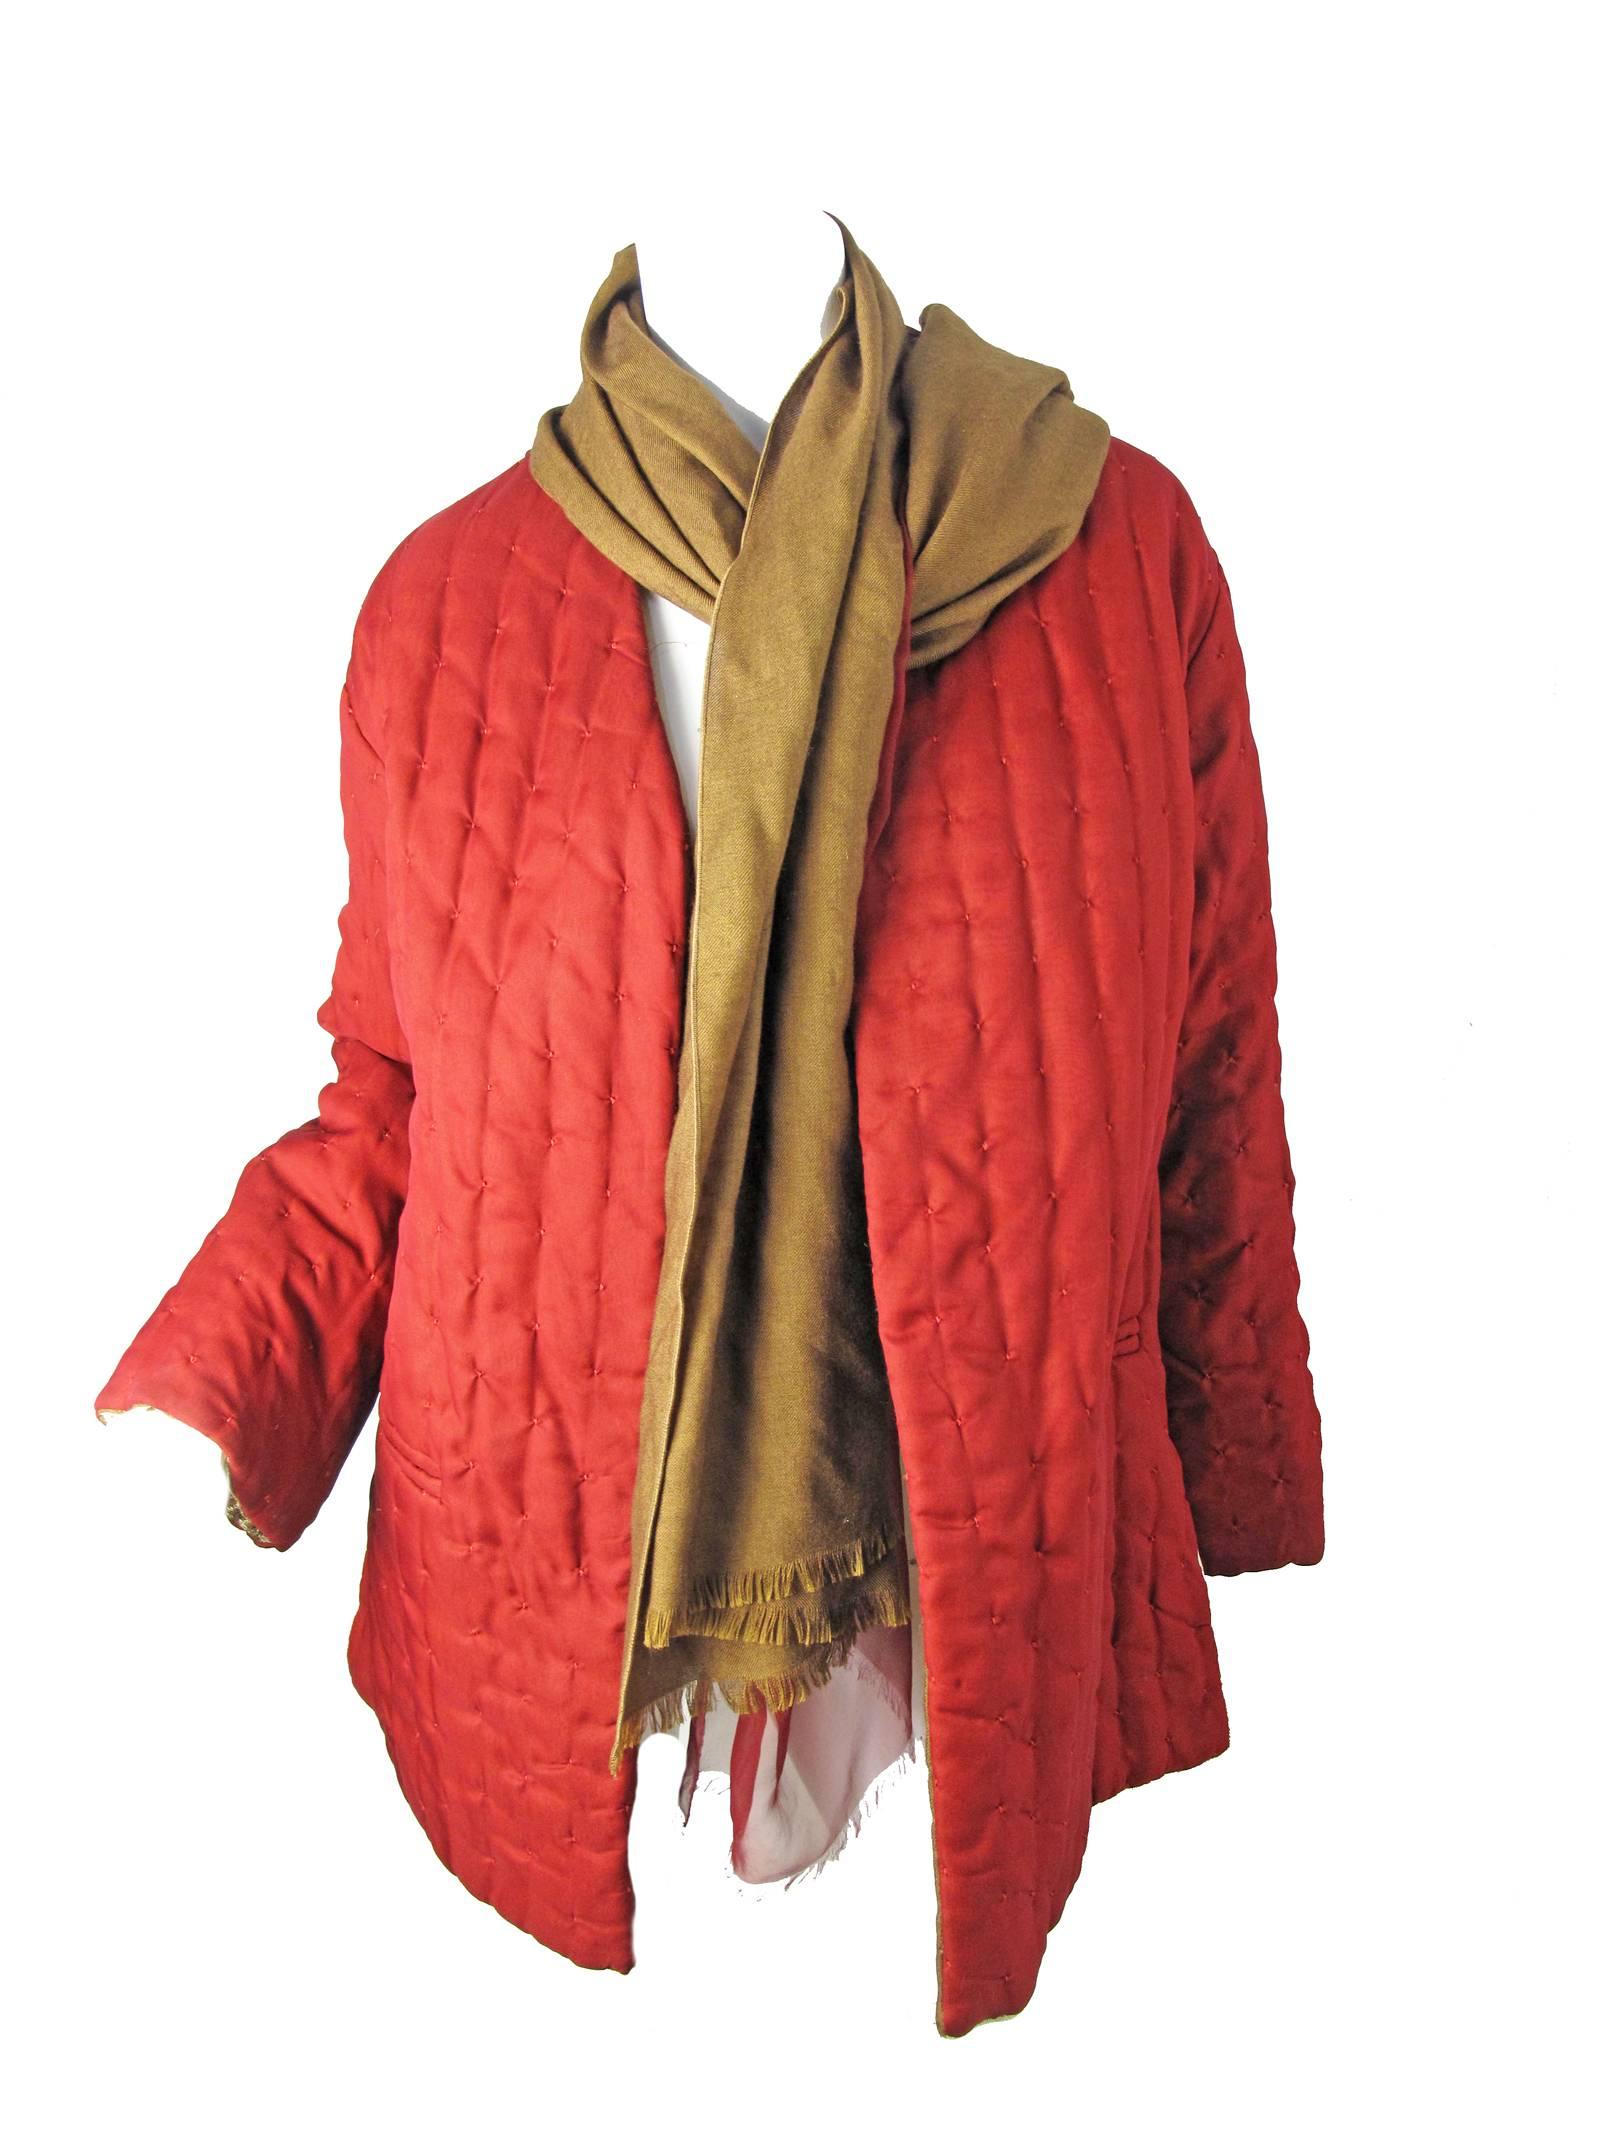 Brown Gianfranco Ferre Reversible Coat with attached Scarf / Head Scarf  